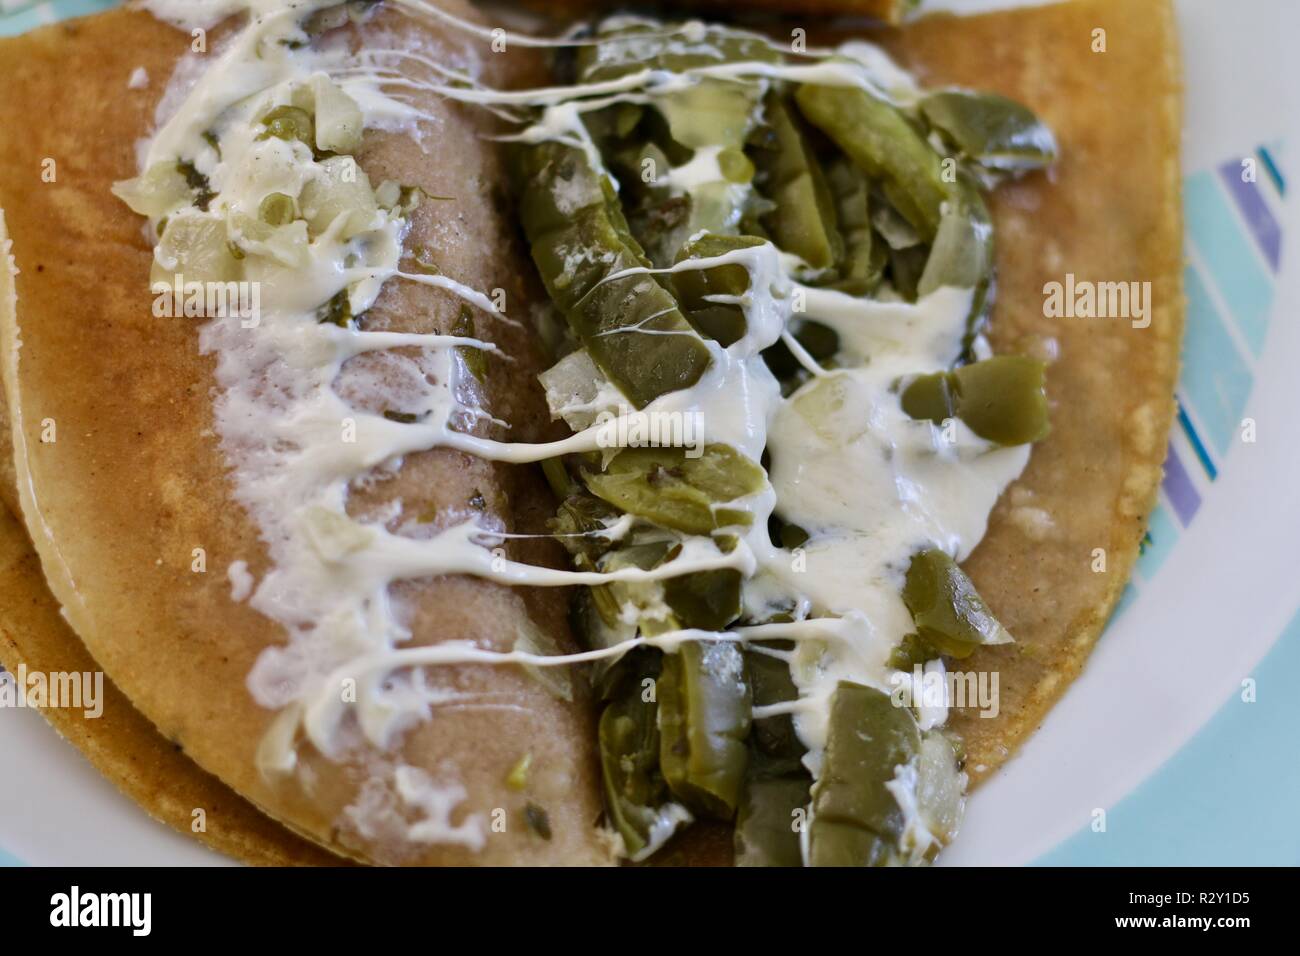 A Nopal (cactus) and Oaxaca cheese quesadilla, traditional Mexican food Stock Photo